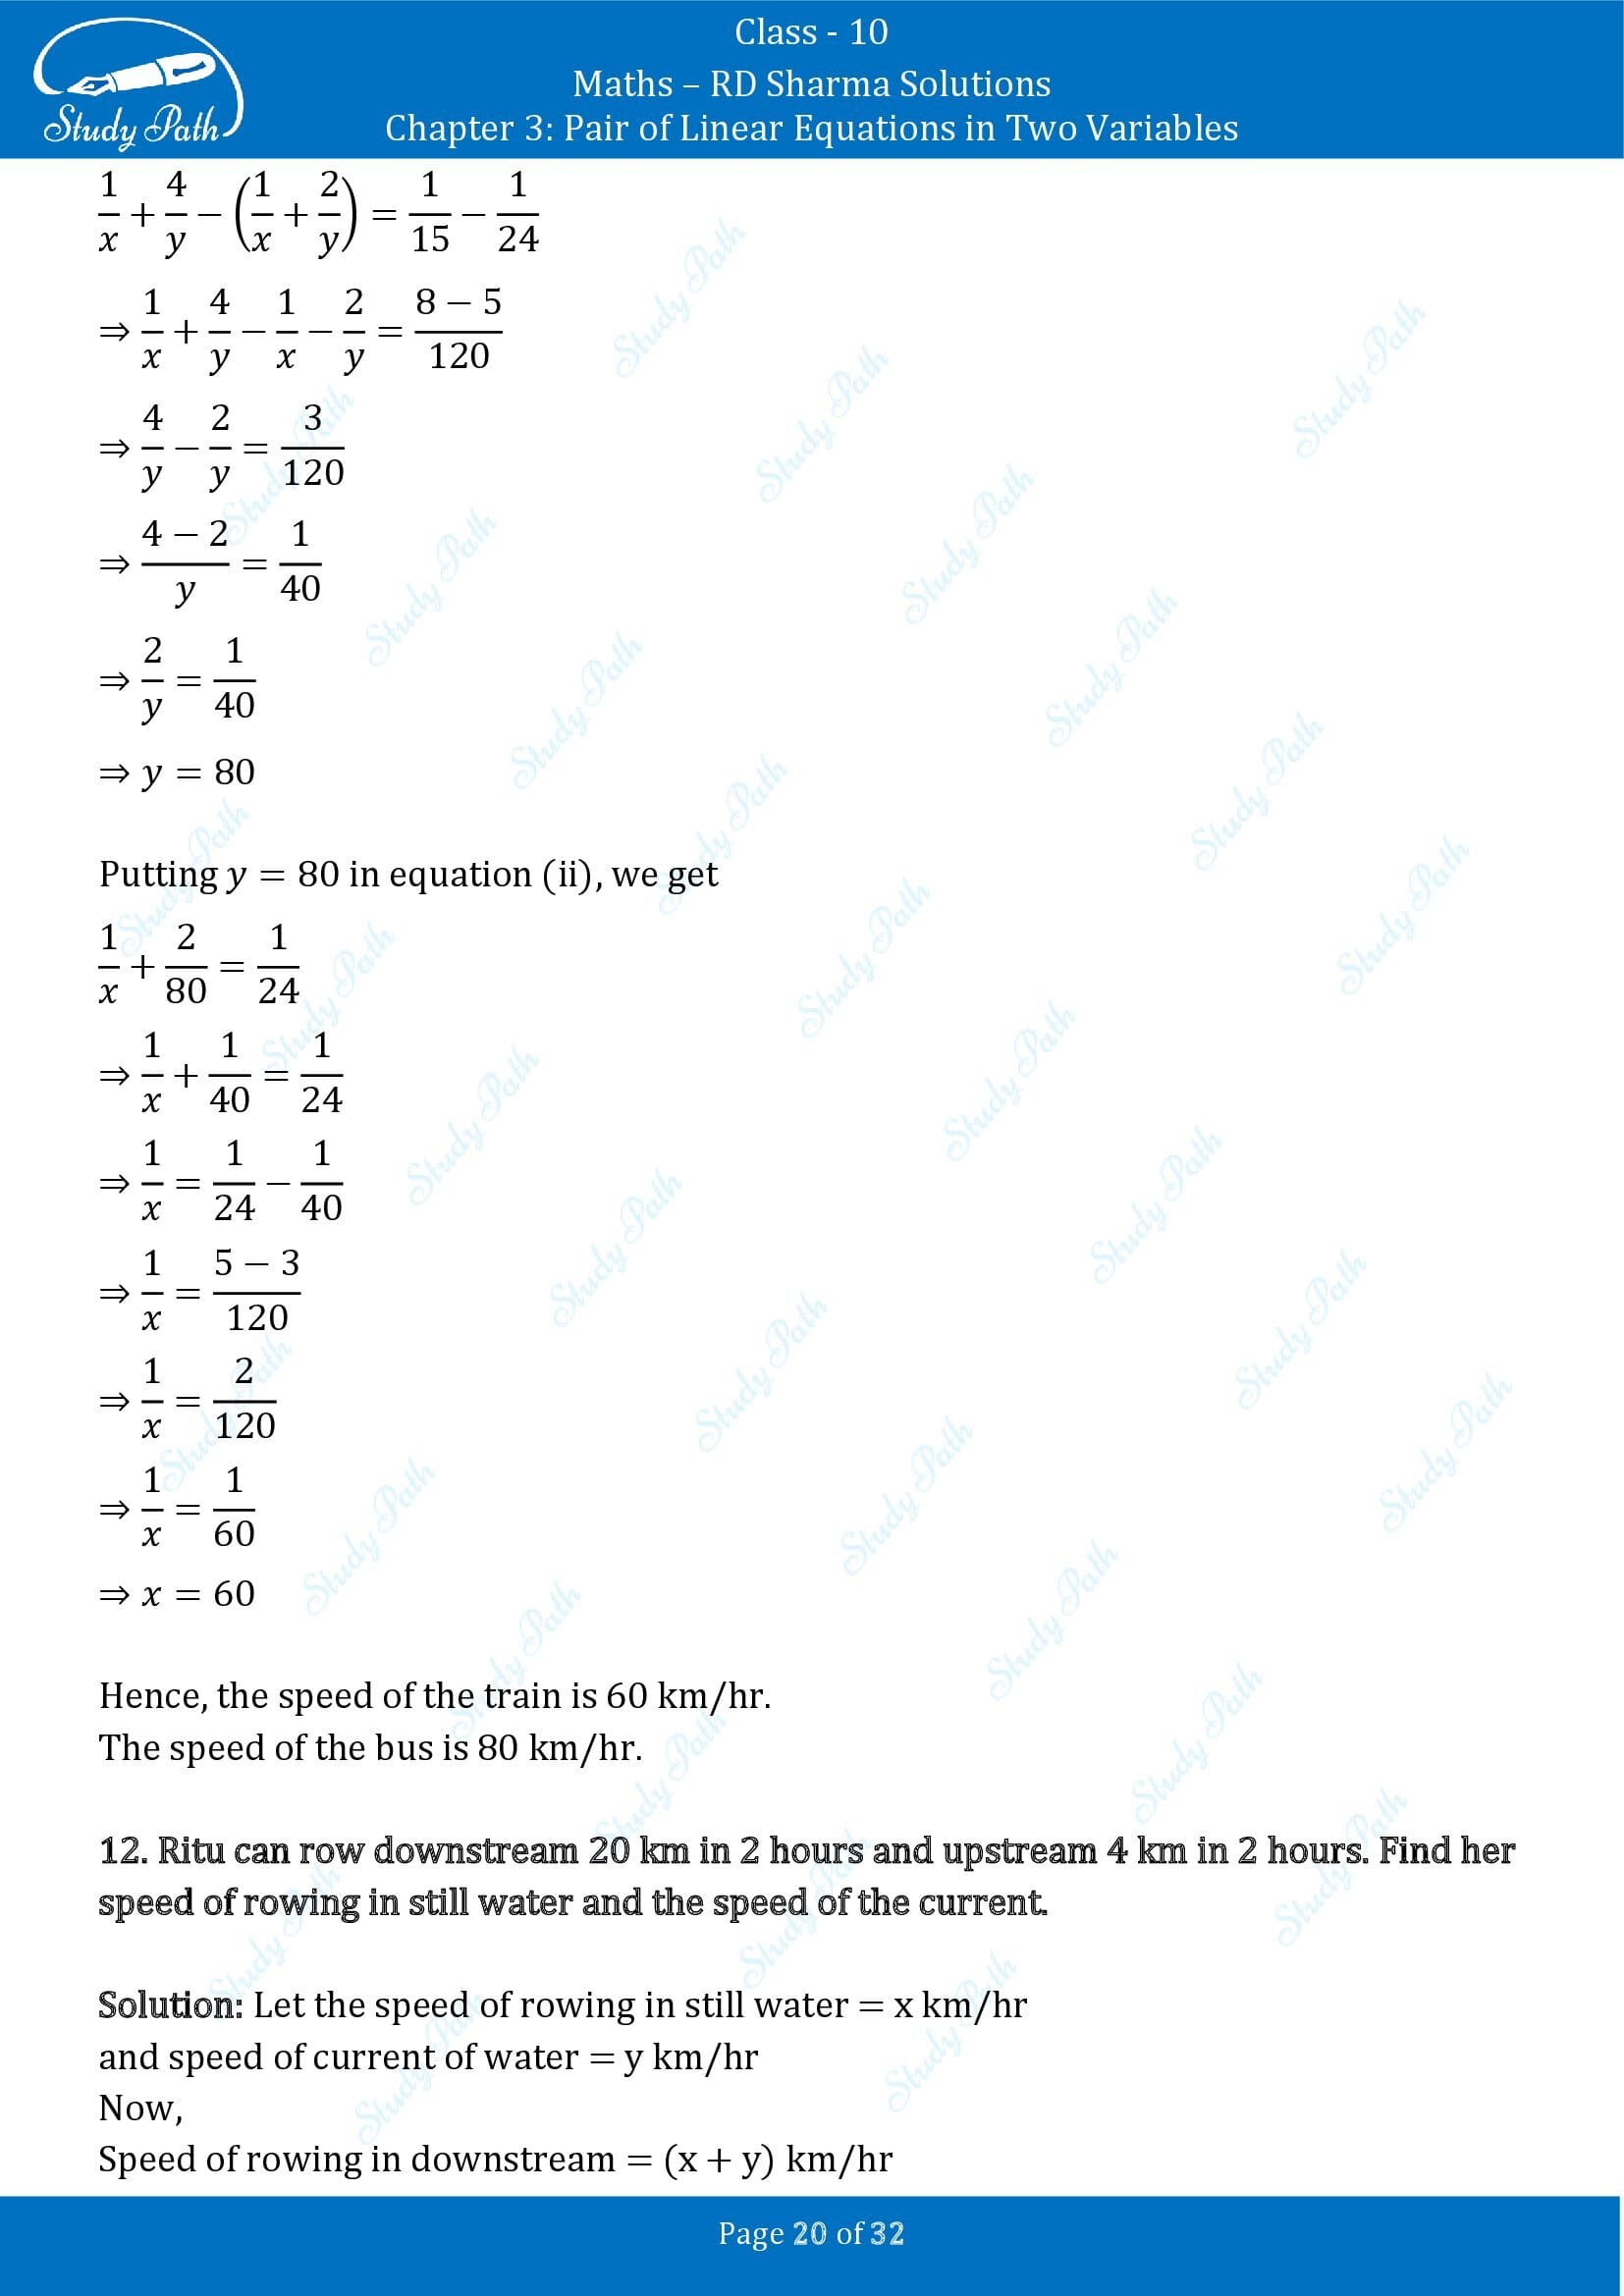 RD Sharma Solutions Class 10 Chapter 3 Pair of Linear Equations in Two Variables Exercise 3.10 00020